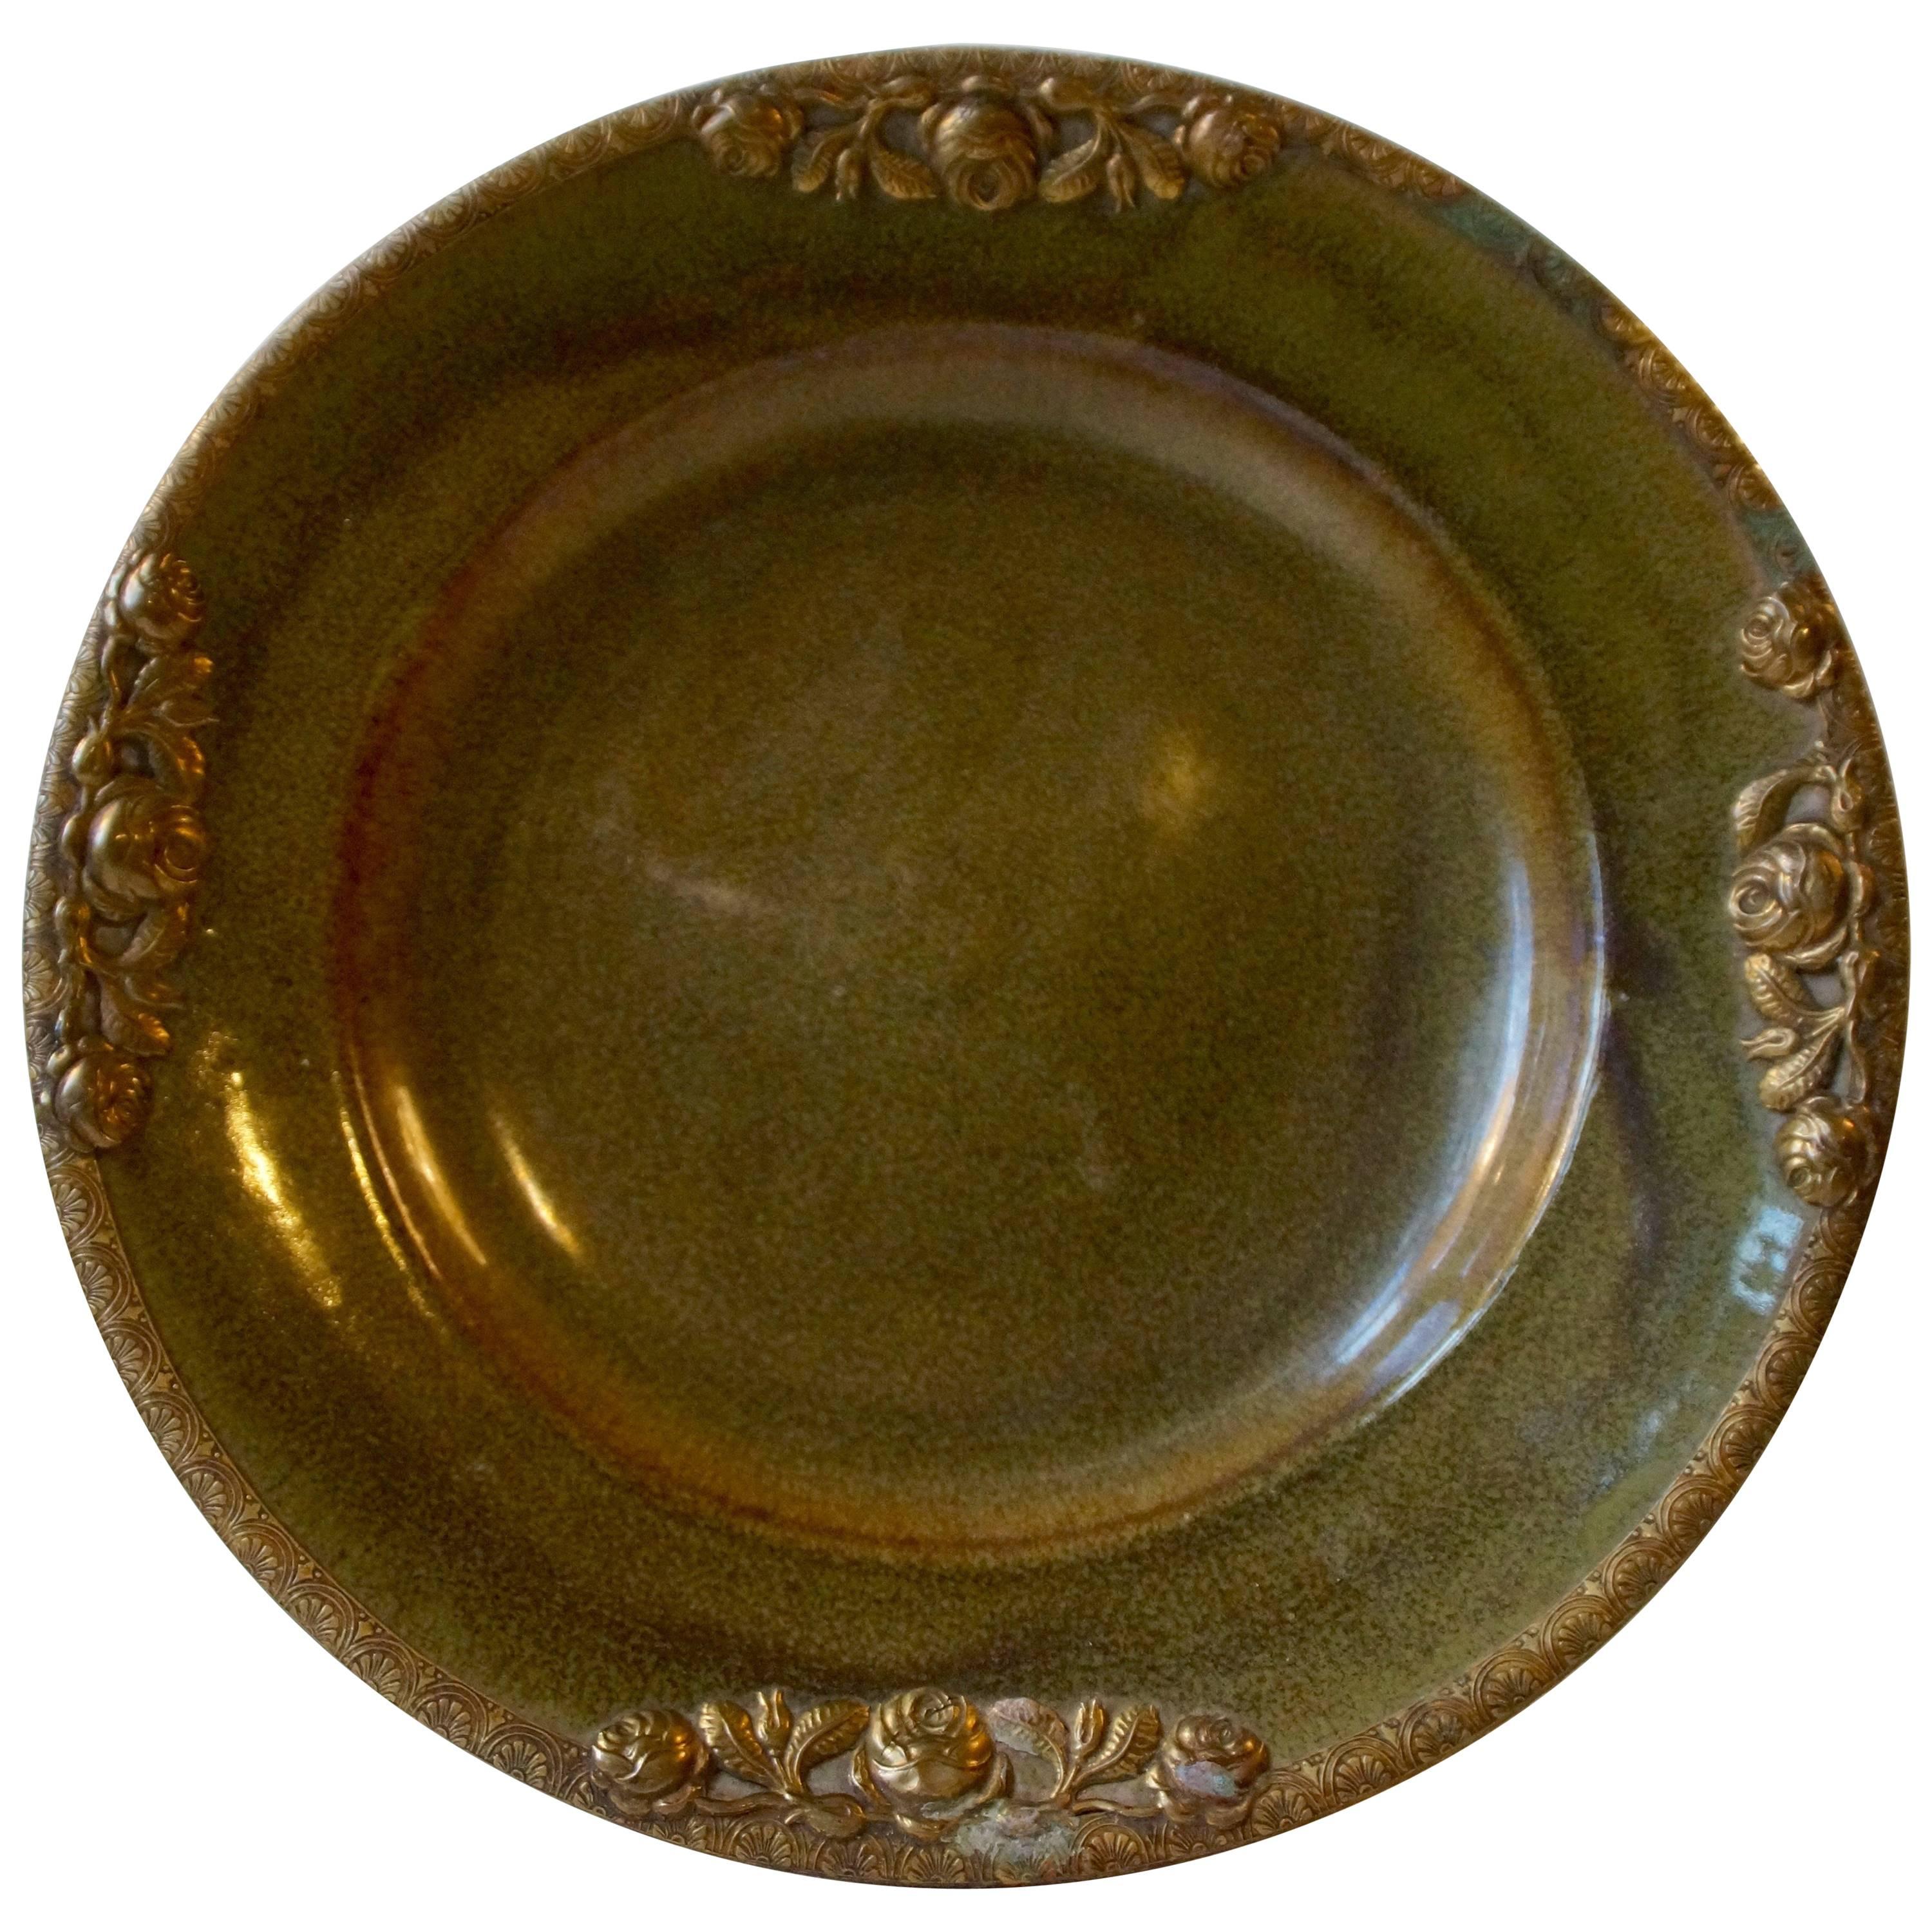 Danish Stoneware Bowl by Michael Andersen with Floral Brass Edge and Ornaments